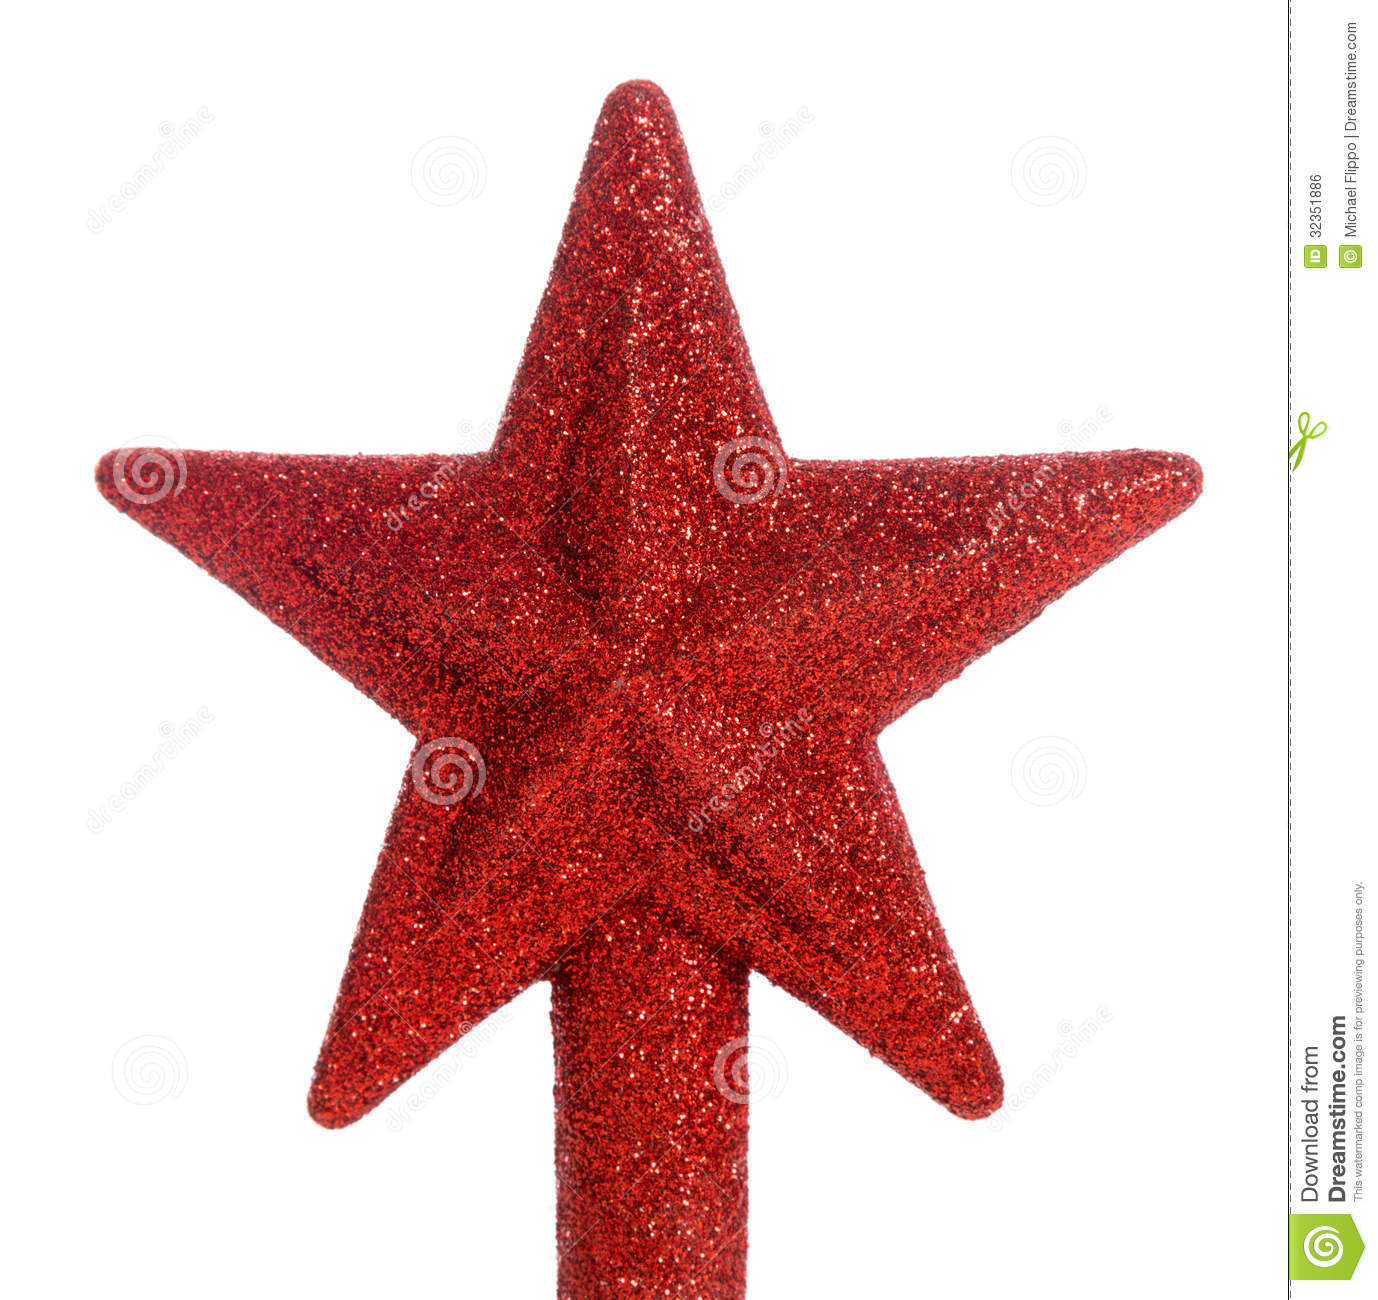 Red Glitter Star Christmas Tree Topper Royalty Free Stock Image    